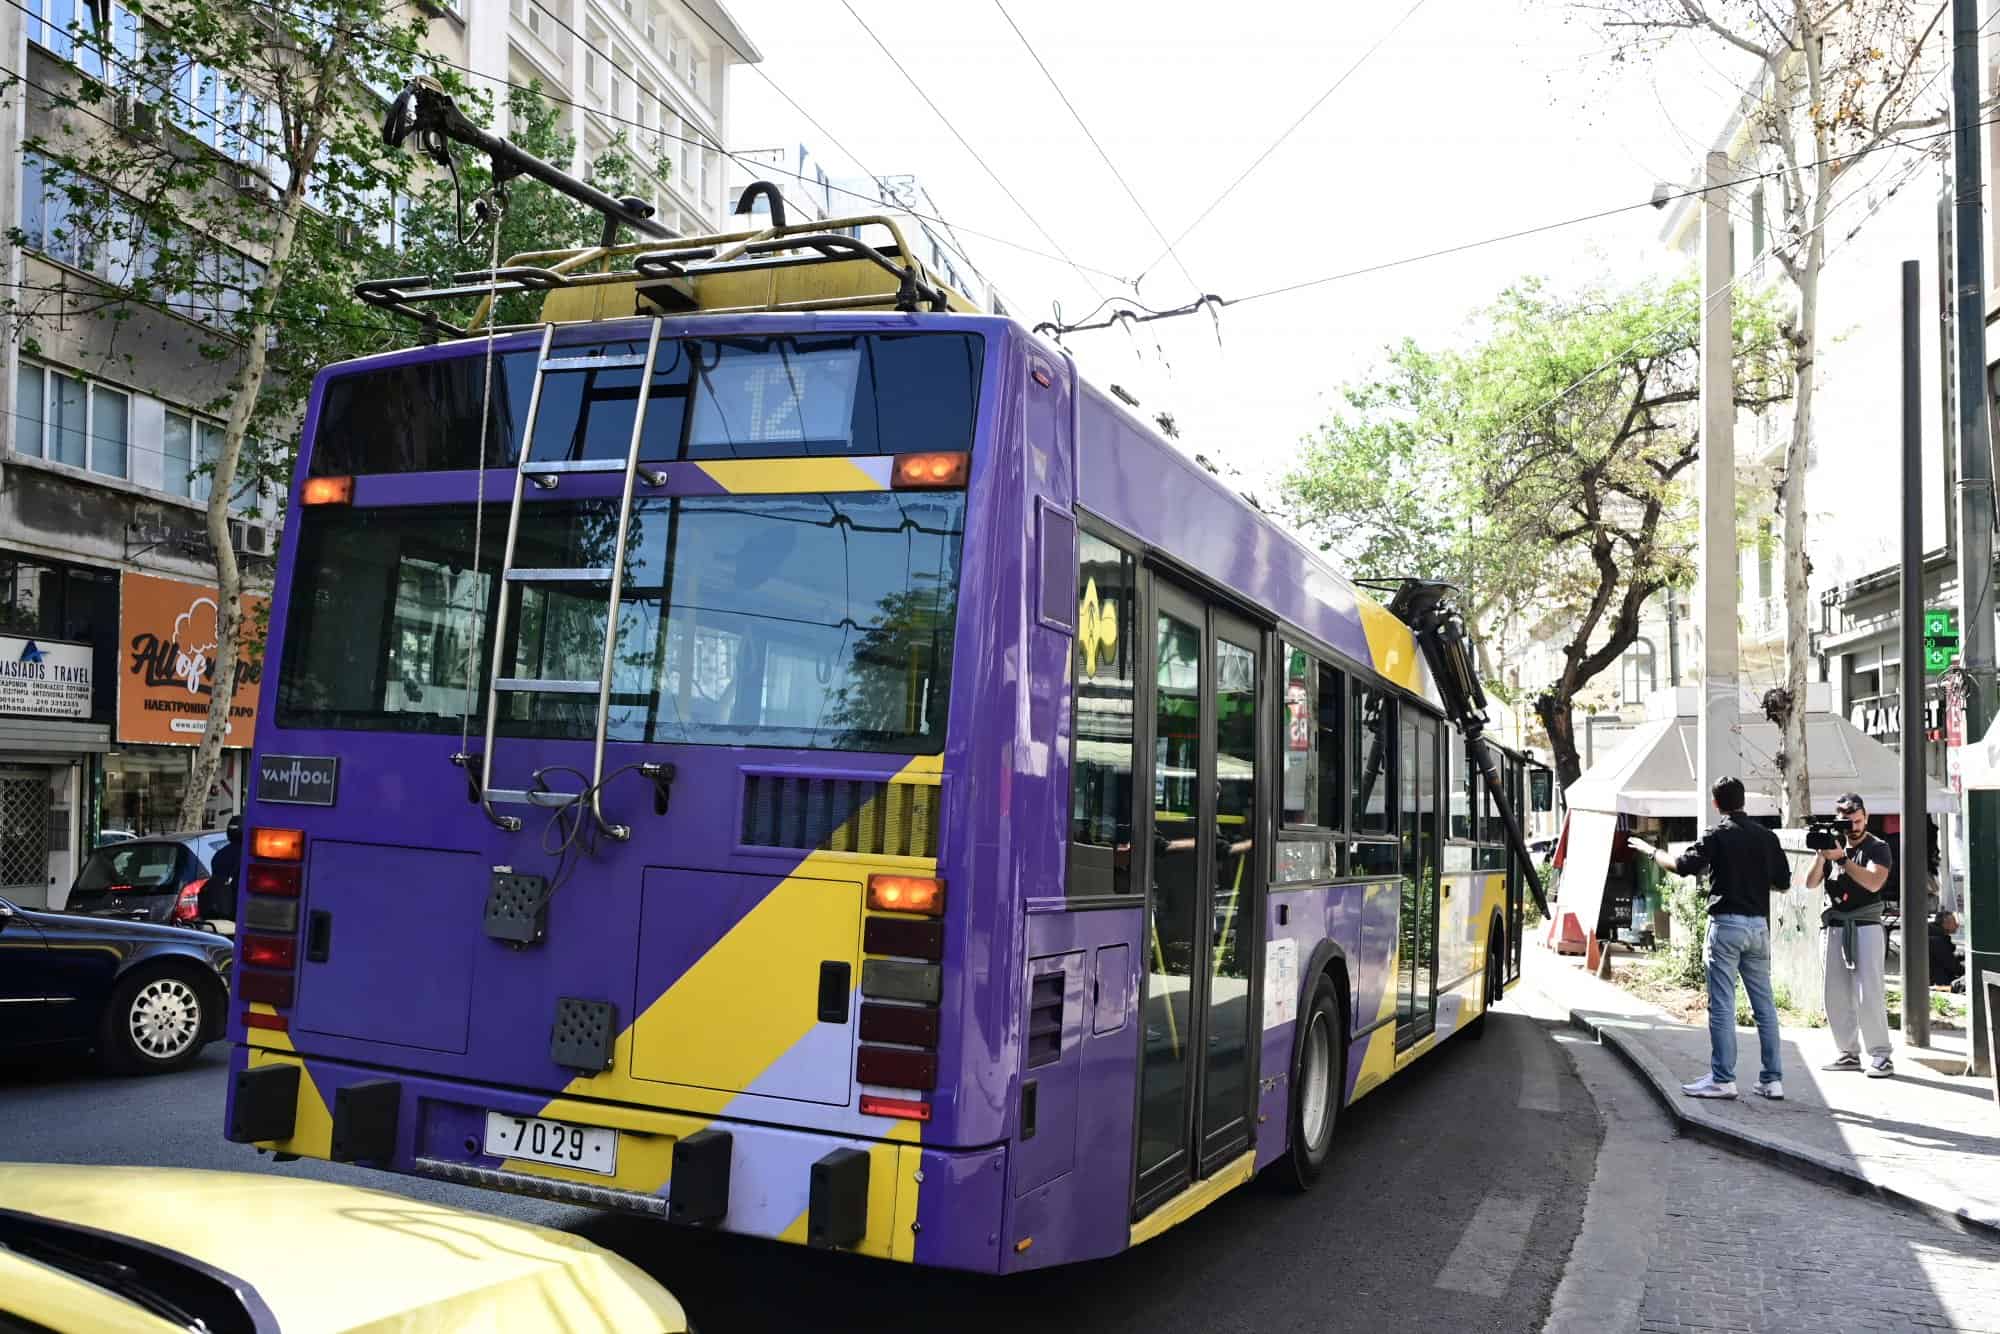 Trolley Accident In Athens: Six People Injured